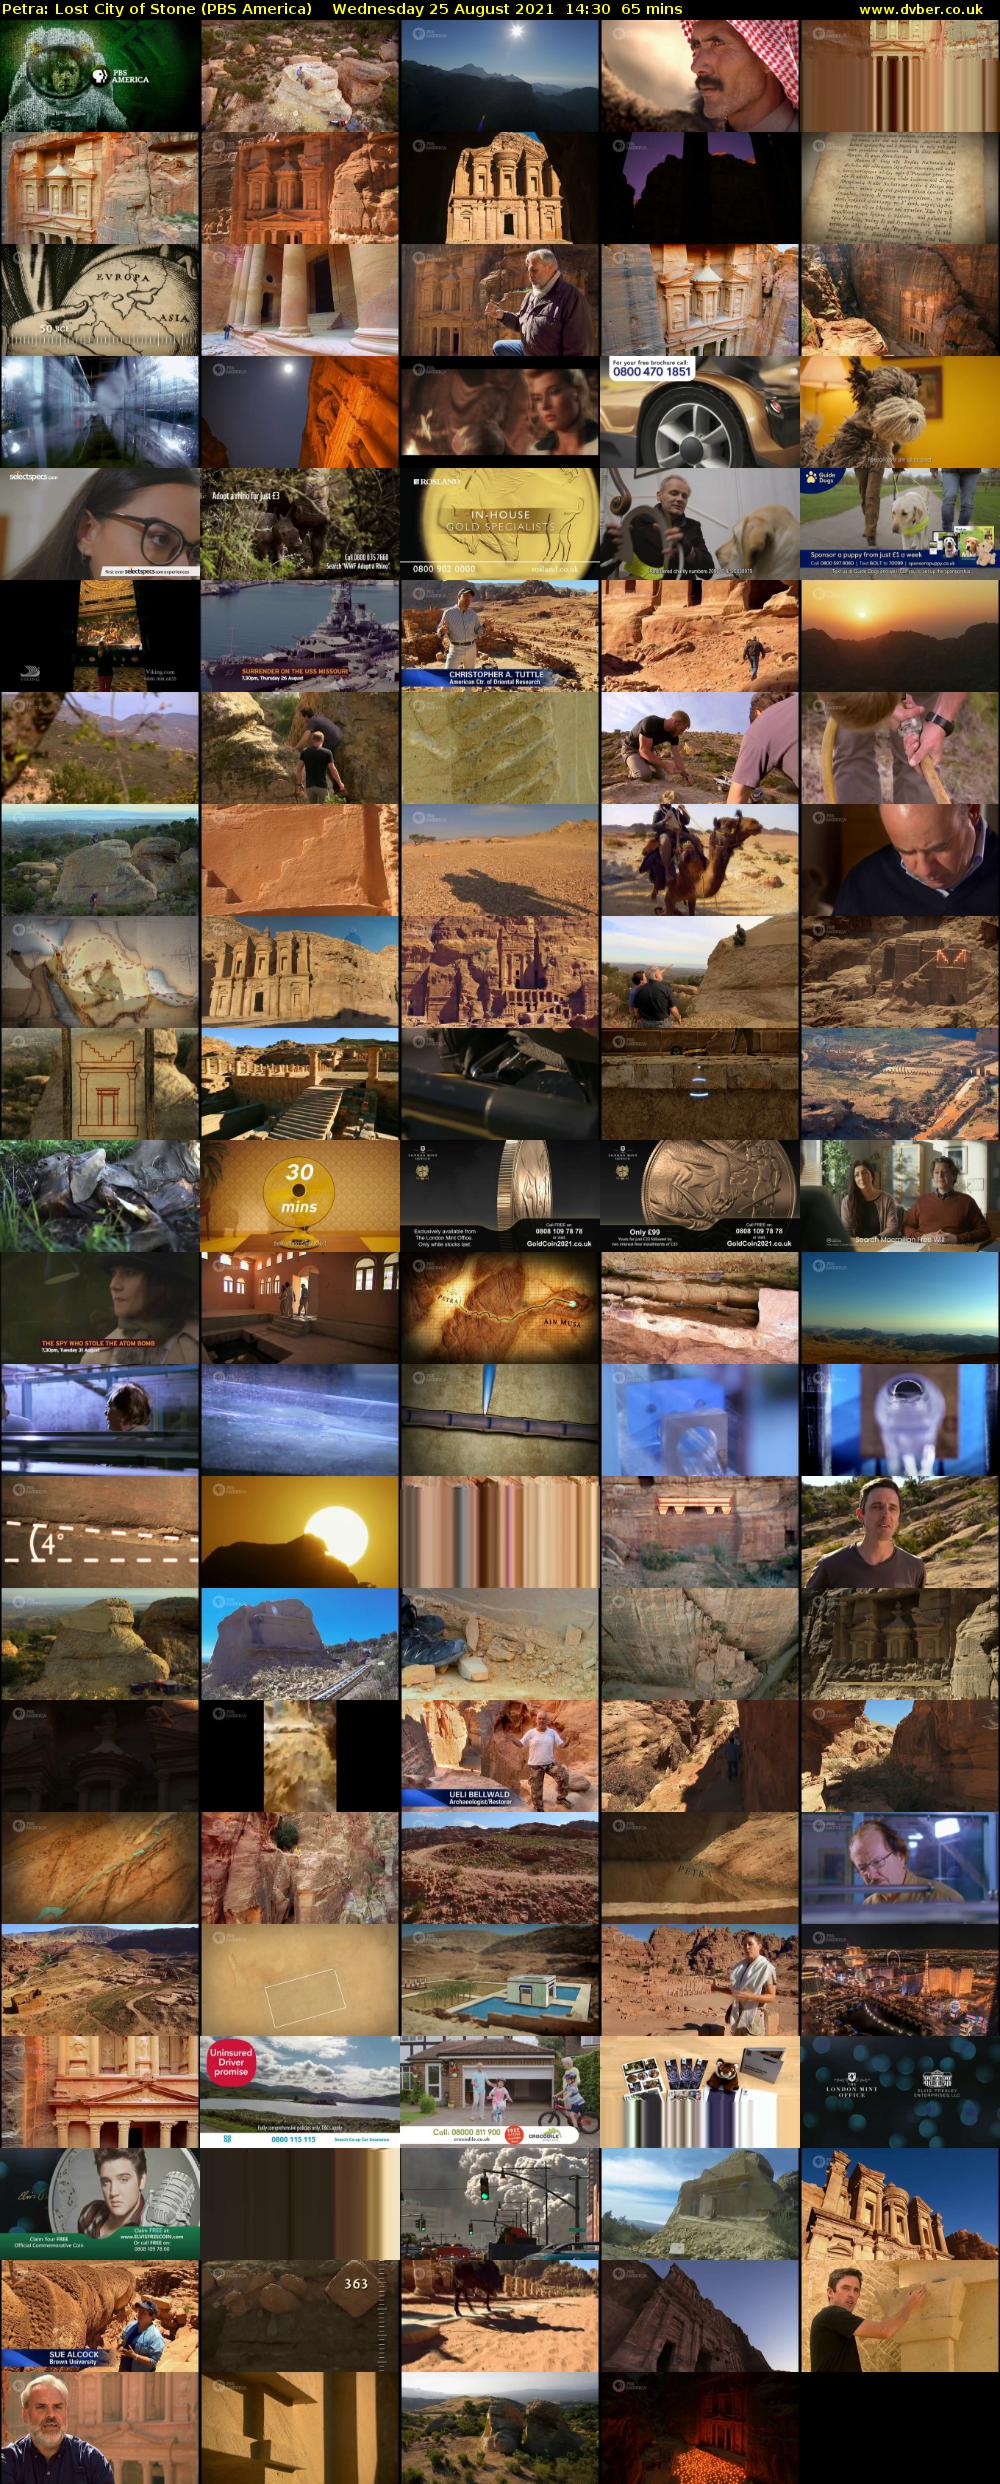 Petra: Lost City of Stone (PBS America) Wednesday 25 August 2021 14:30 - 15:35